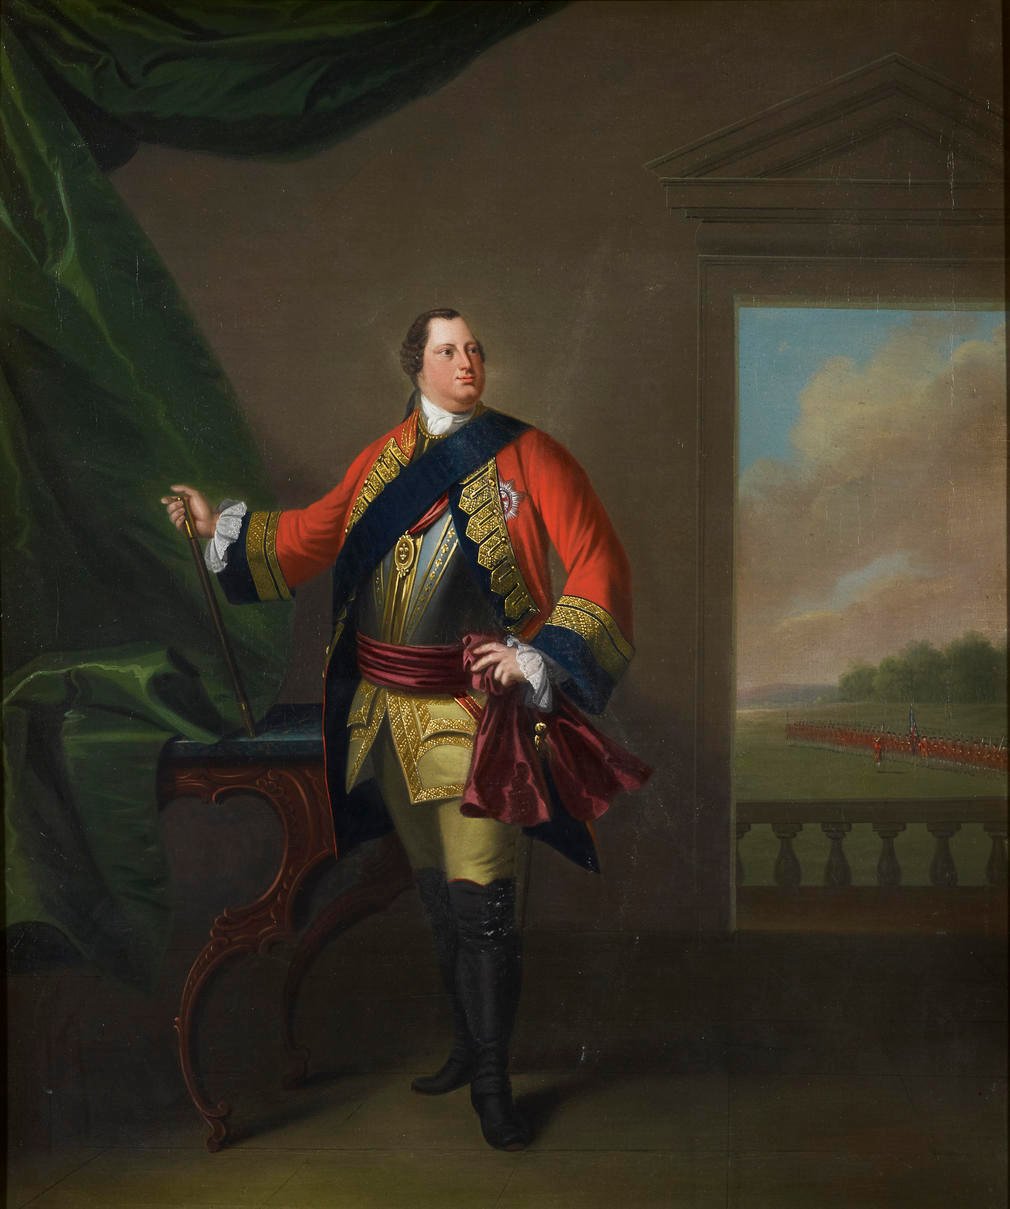 Morier was a Swiss military and sporting painter who started working for William Augustus, Duke of Cumberland (1721-65) in 1747, when he painted a series of pictures of troops under his command. From 1752 until 1764 he was employed as ‘limner’